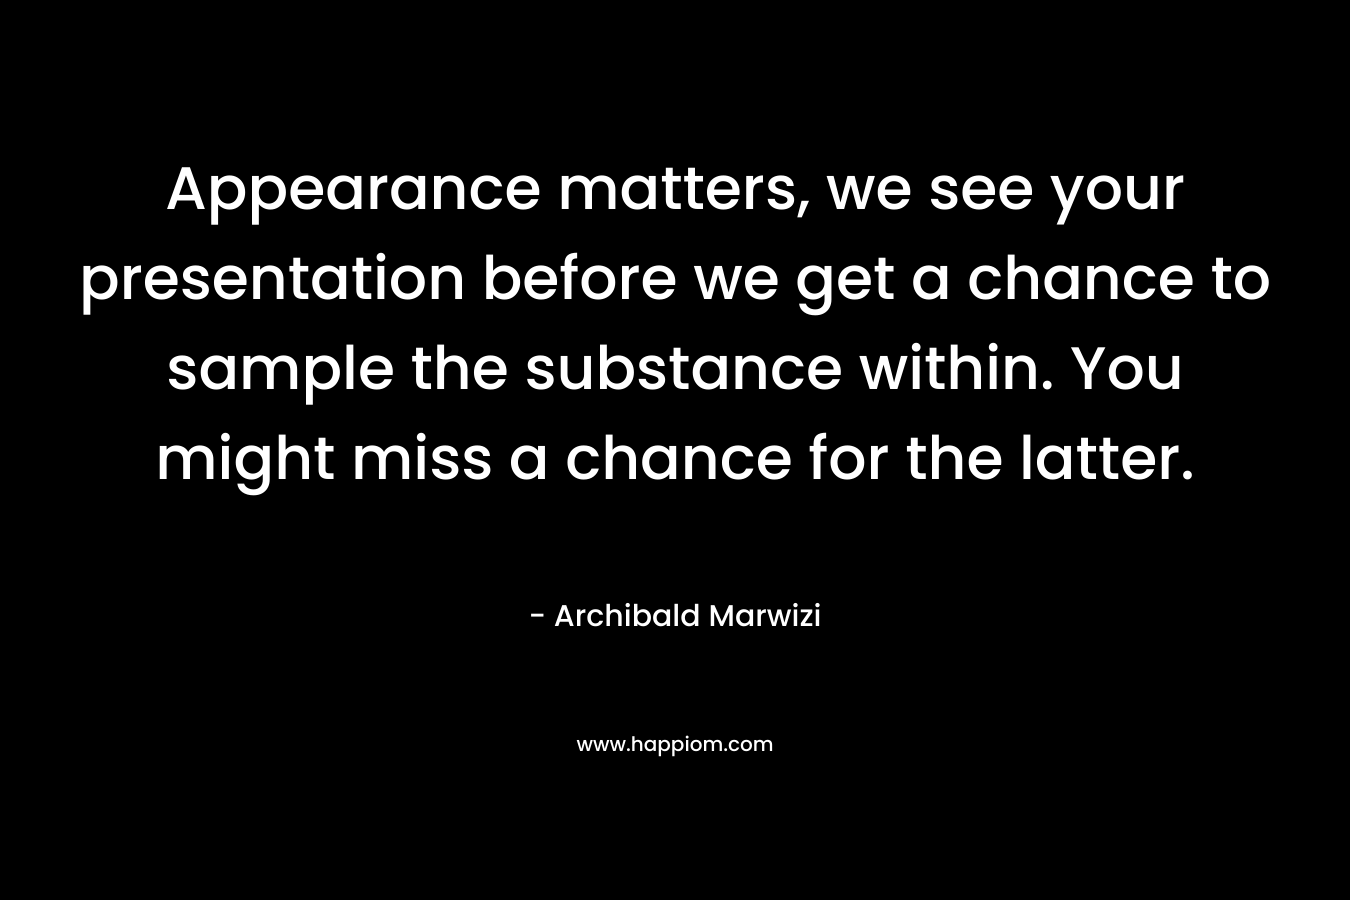 Appearance matters, we see your presentation before we get a chance to sample the substance within. You might miss a chance for the latter.